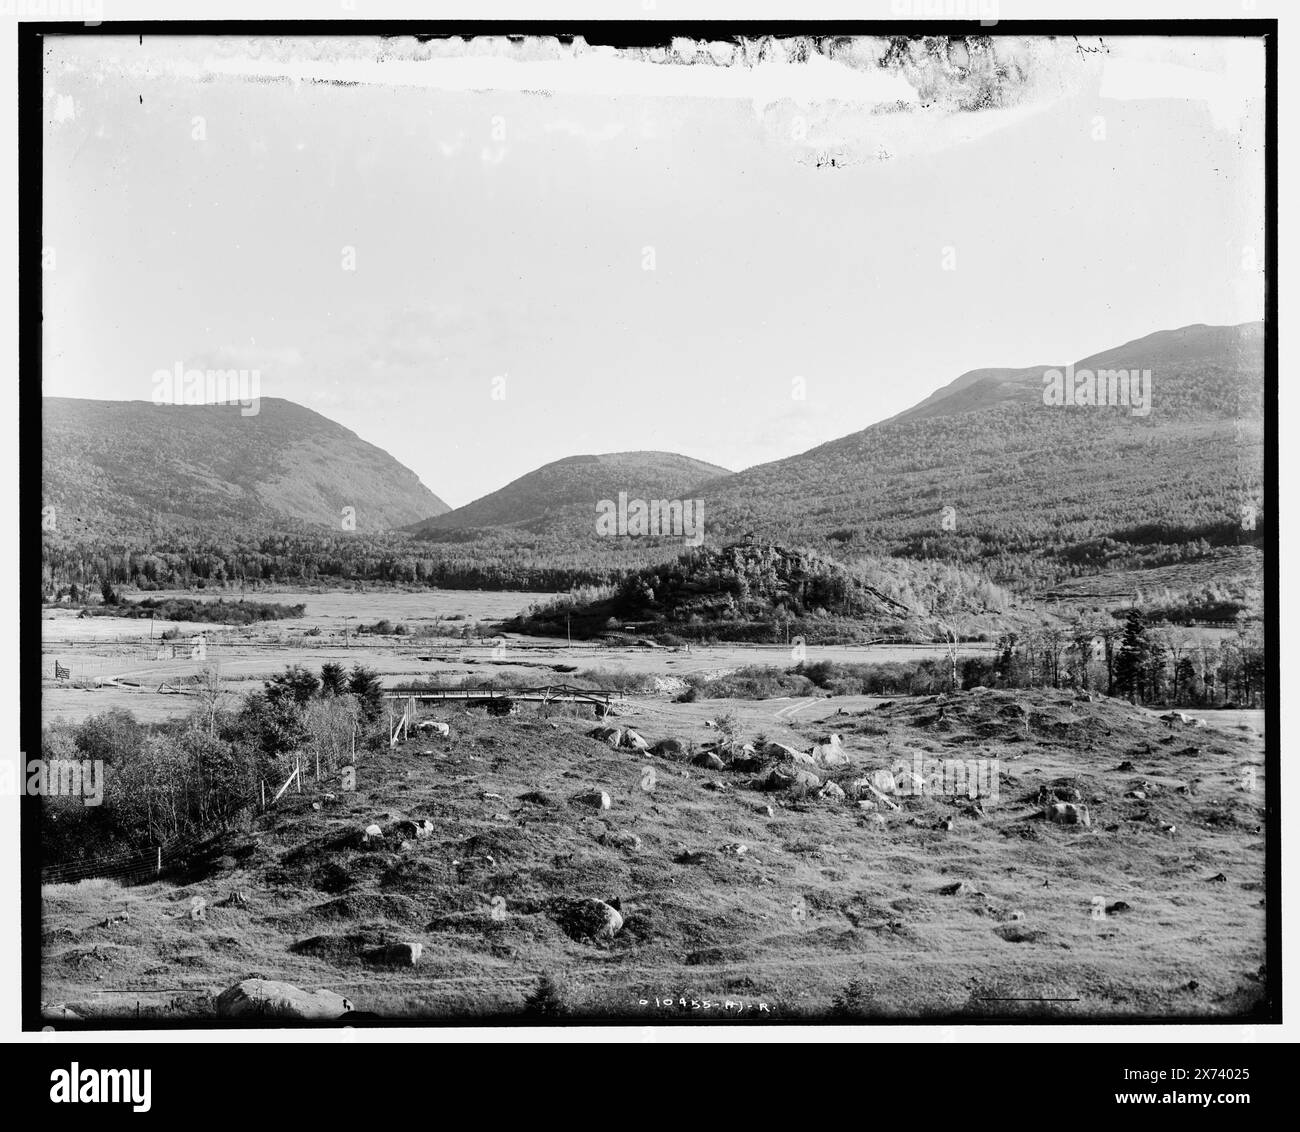 Presidential Range e Crawford Notch from golf Links, White Mountains, N.H., videodisc images out of sequence; actual left to right order is: 1A-06075, 06074, 06073., Title and date based on Detroit, Catalogue J (1901). sezione estrema sinistra non in raccolta., '318' su negativo D4-10455 LC, '320' su D4-10455 R., Detroit Publishing Co. n. 010455., Gift; State Historical Society of Colorado; 1949, Mountains. , Passi (Landforms) , Stati Uniti, New Hampshire, White Mountains. , Stati Uniti, New Hampshire, Crawford Notch. , Stati Uniti, New Hampshire, Presidente Foto Stock